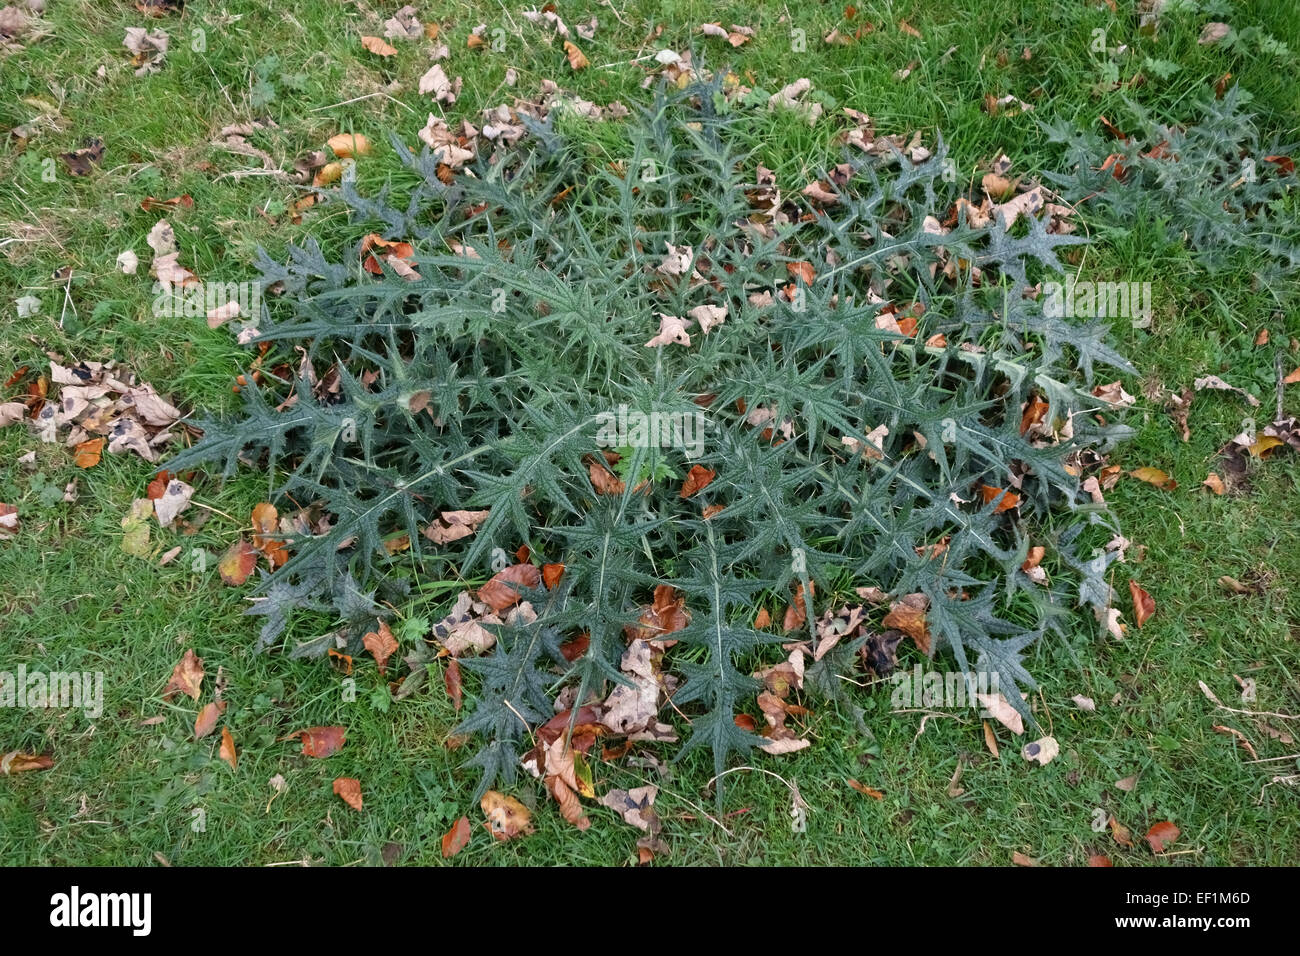 A rosette of spiny leaves of a spear thistle, Cirsium vulgare, on short grass meadow, Berkshire, October Stock Photo